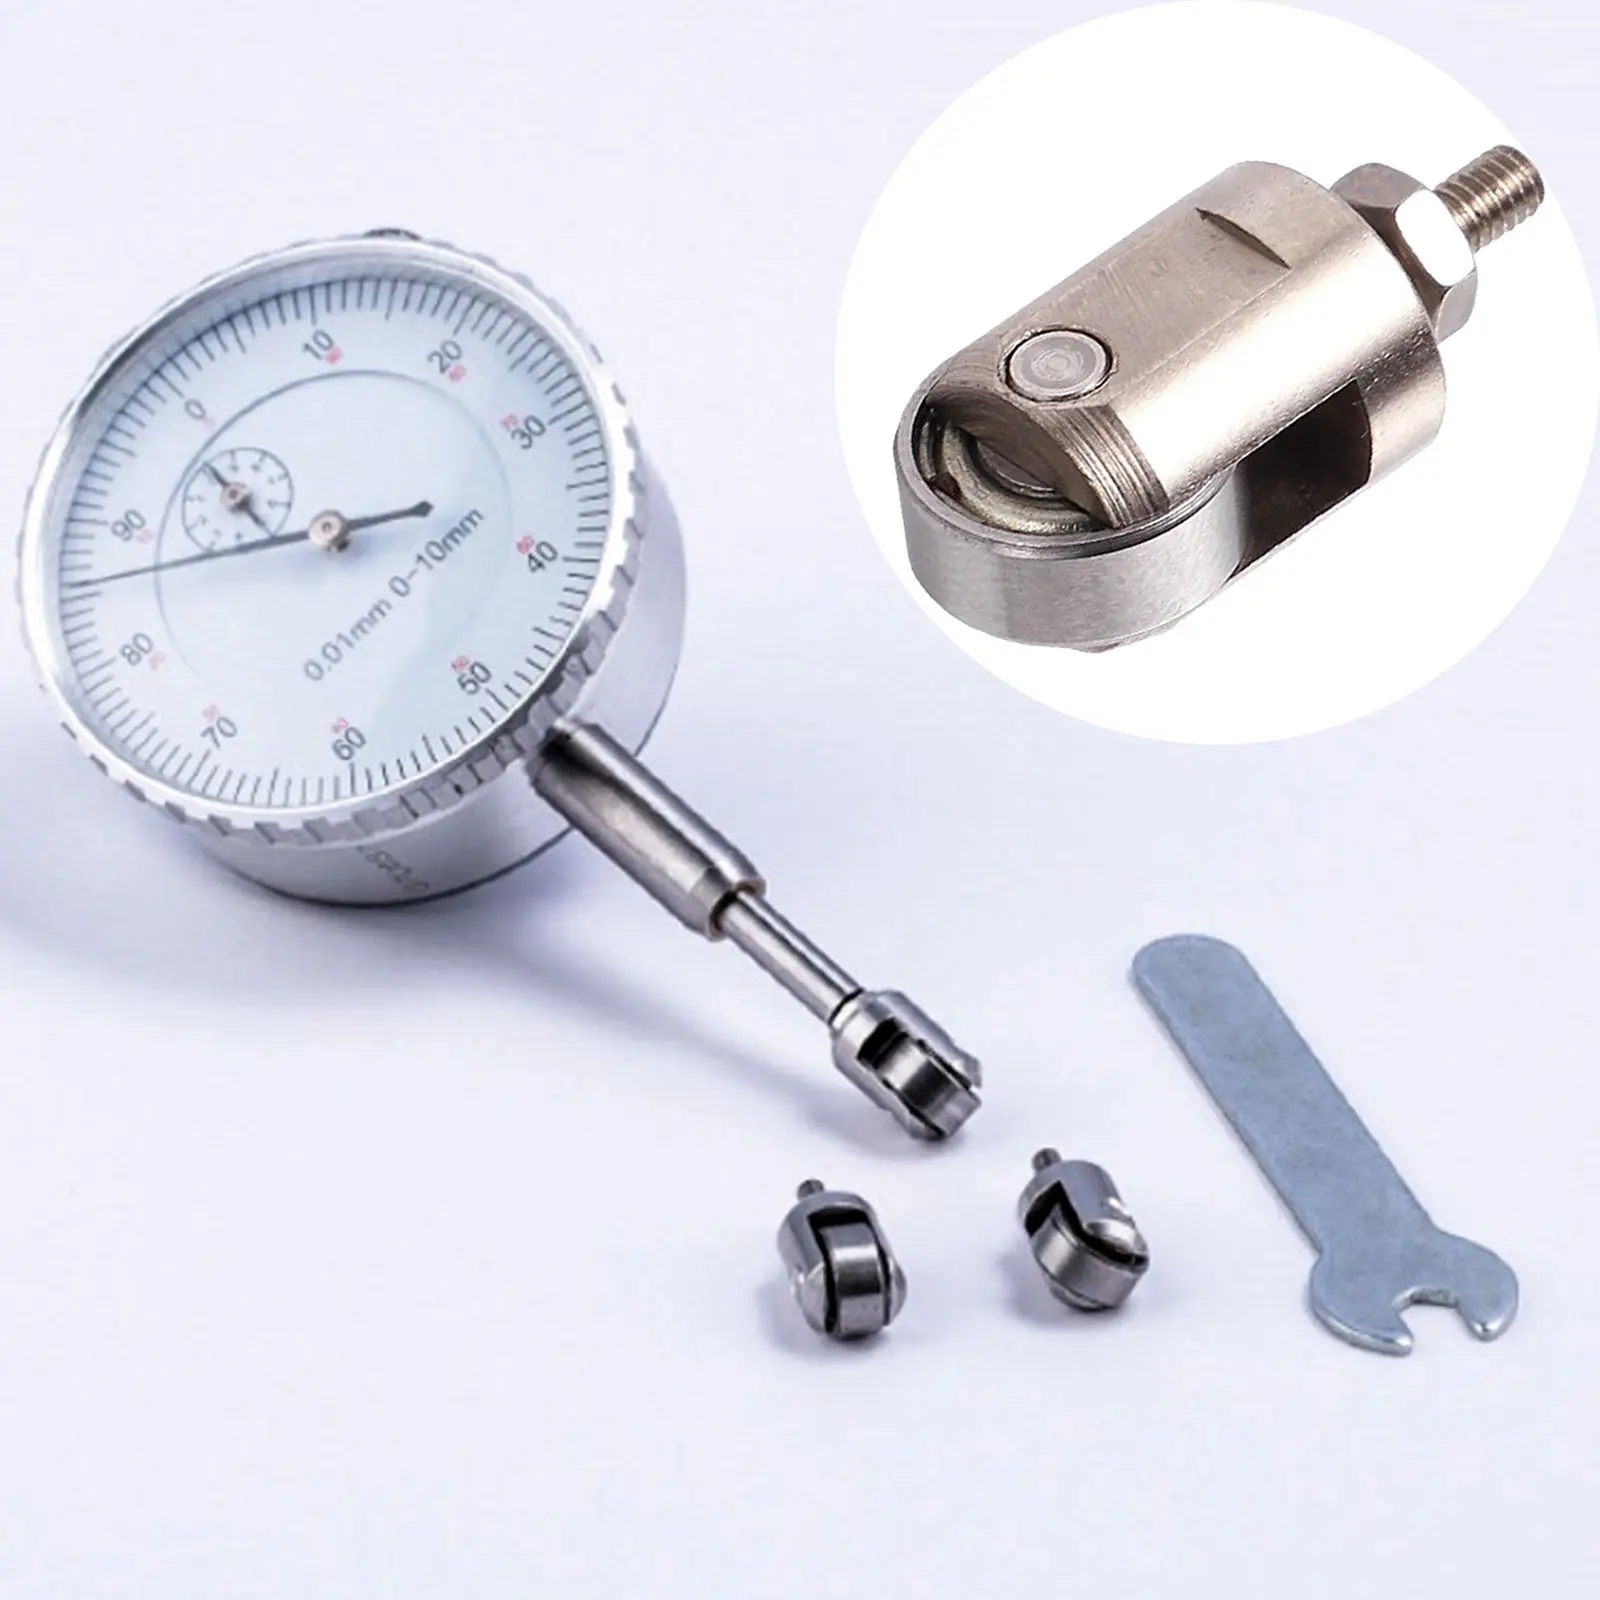 M2.5 Threaded Contact Point for Dial Indicator Standard Depth Gauge Roller Tip Parts Probe